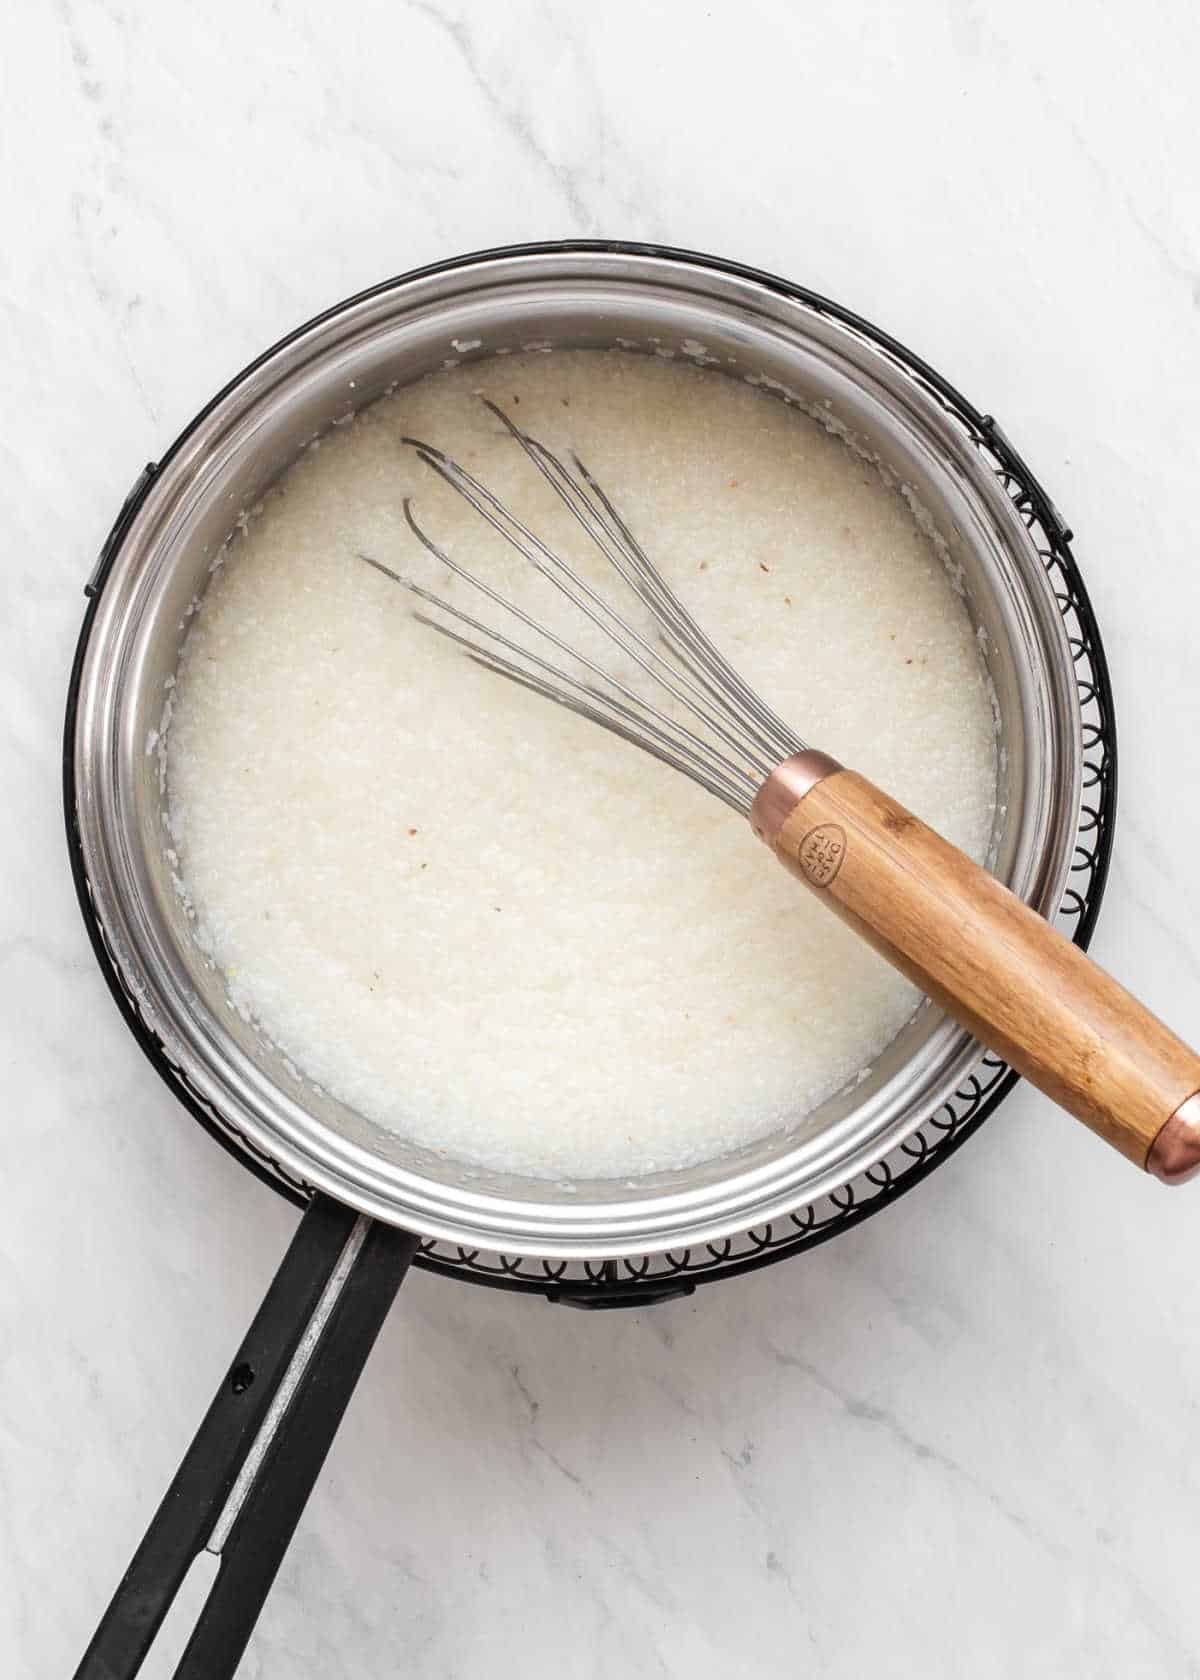 quick cooking grits in pot with whisk, overhead view.